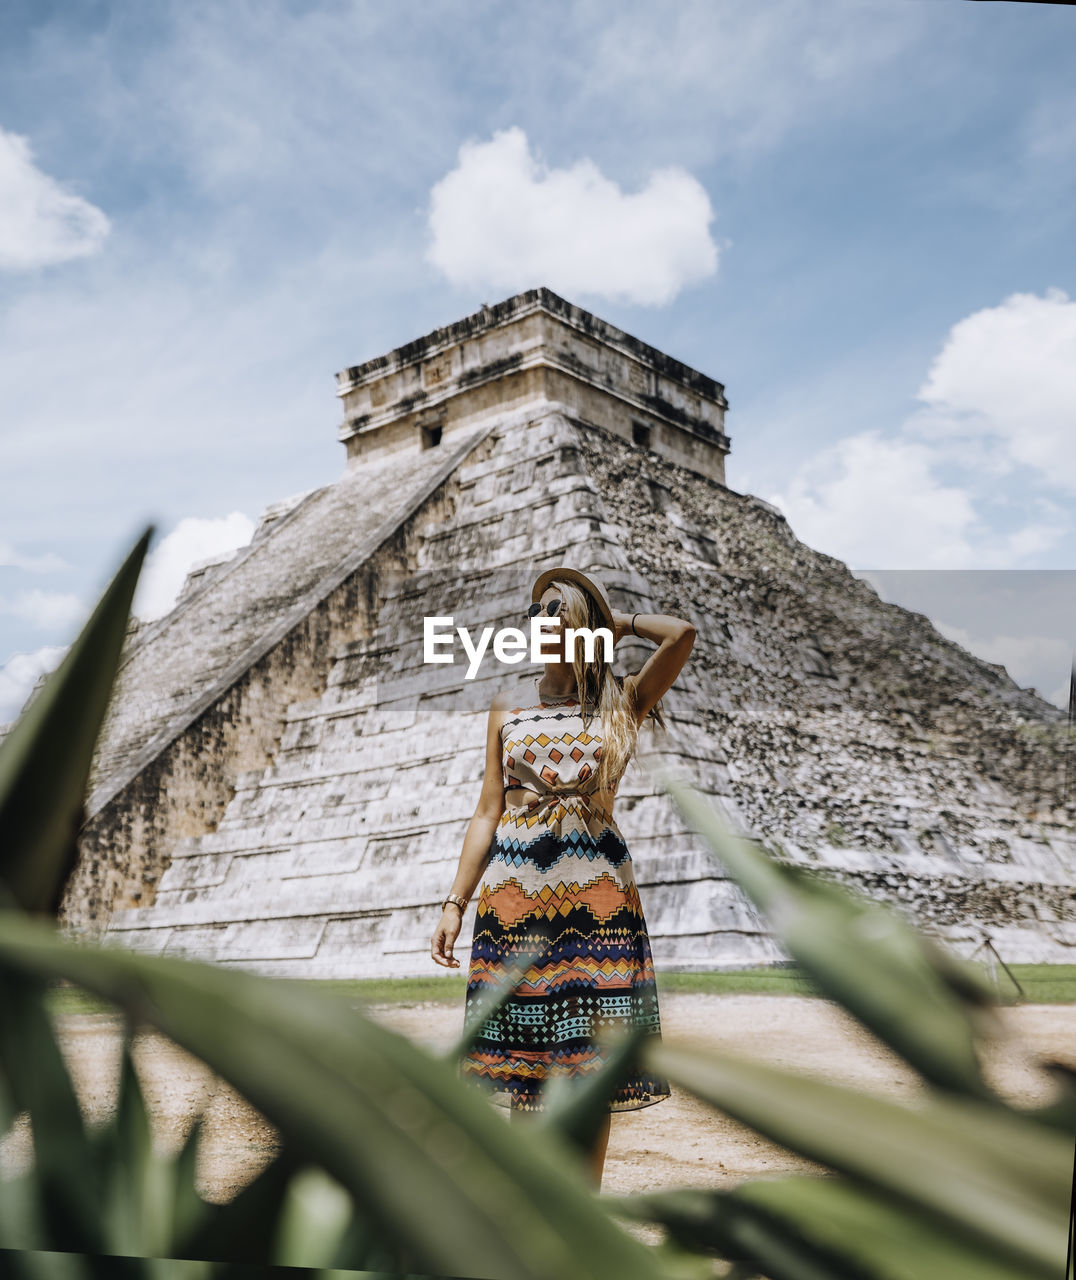 A young woman at the famous chichen itza.